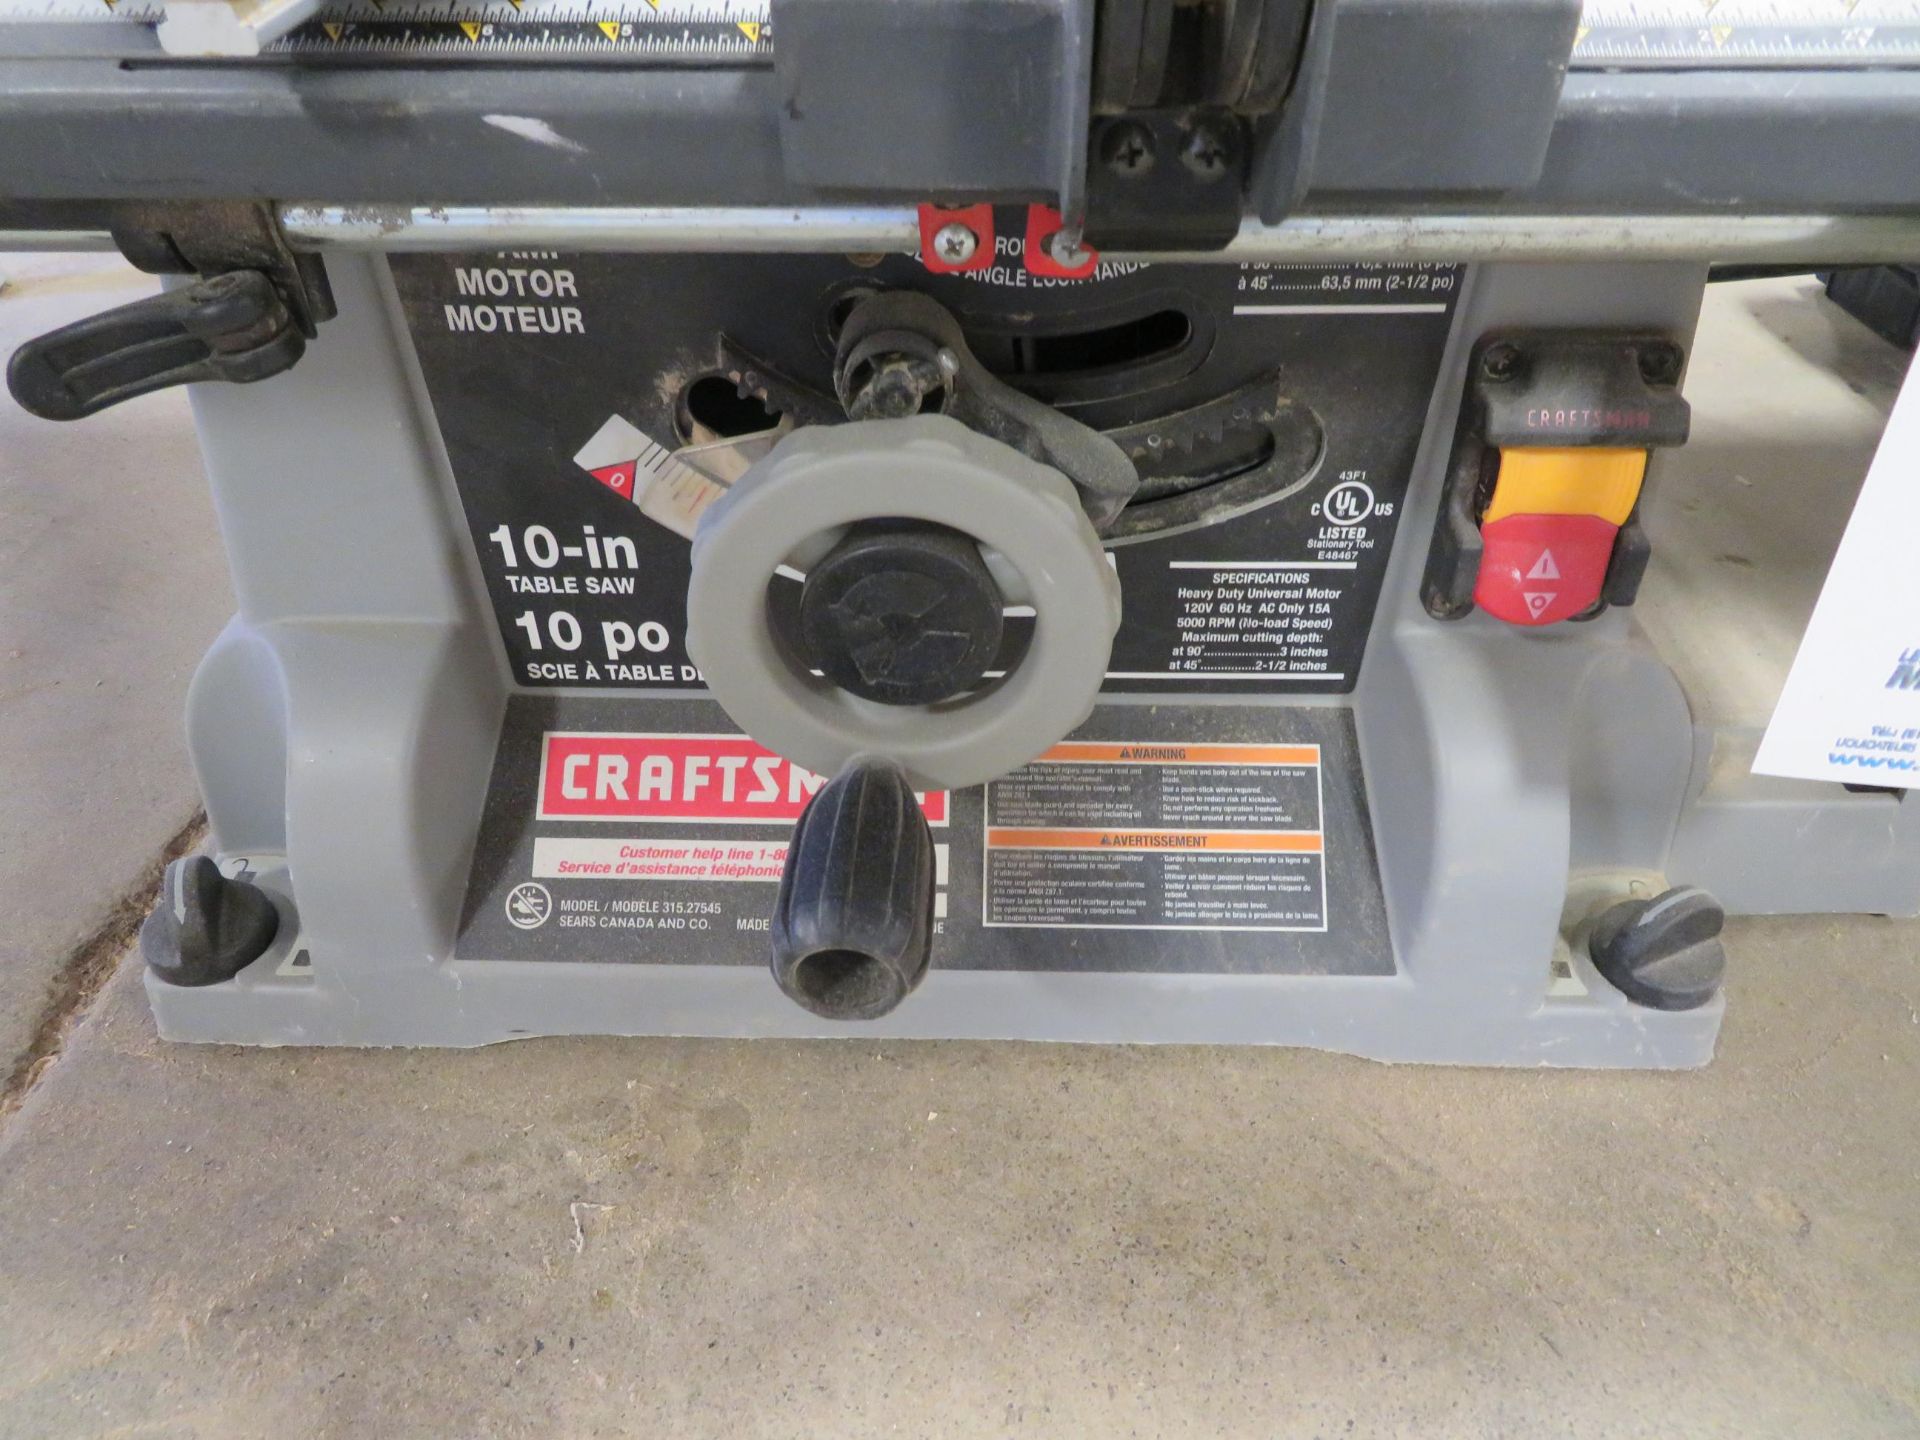 CRAFSTMAN 10" table saw, Mod# 315-27545, 110 Volts - Image 2 of 3